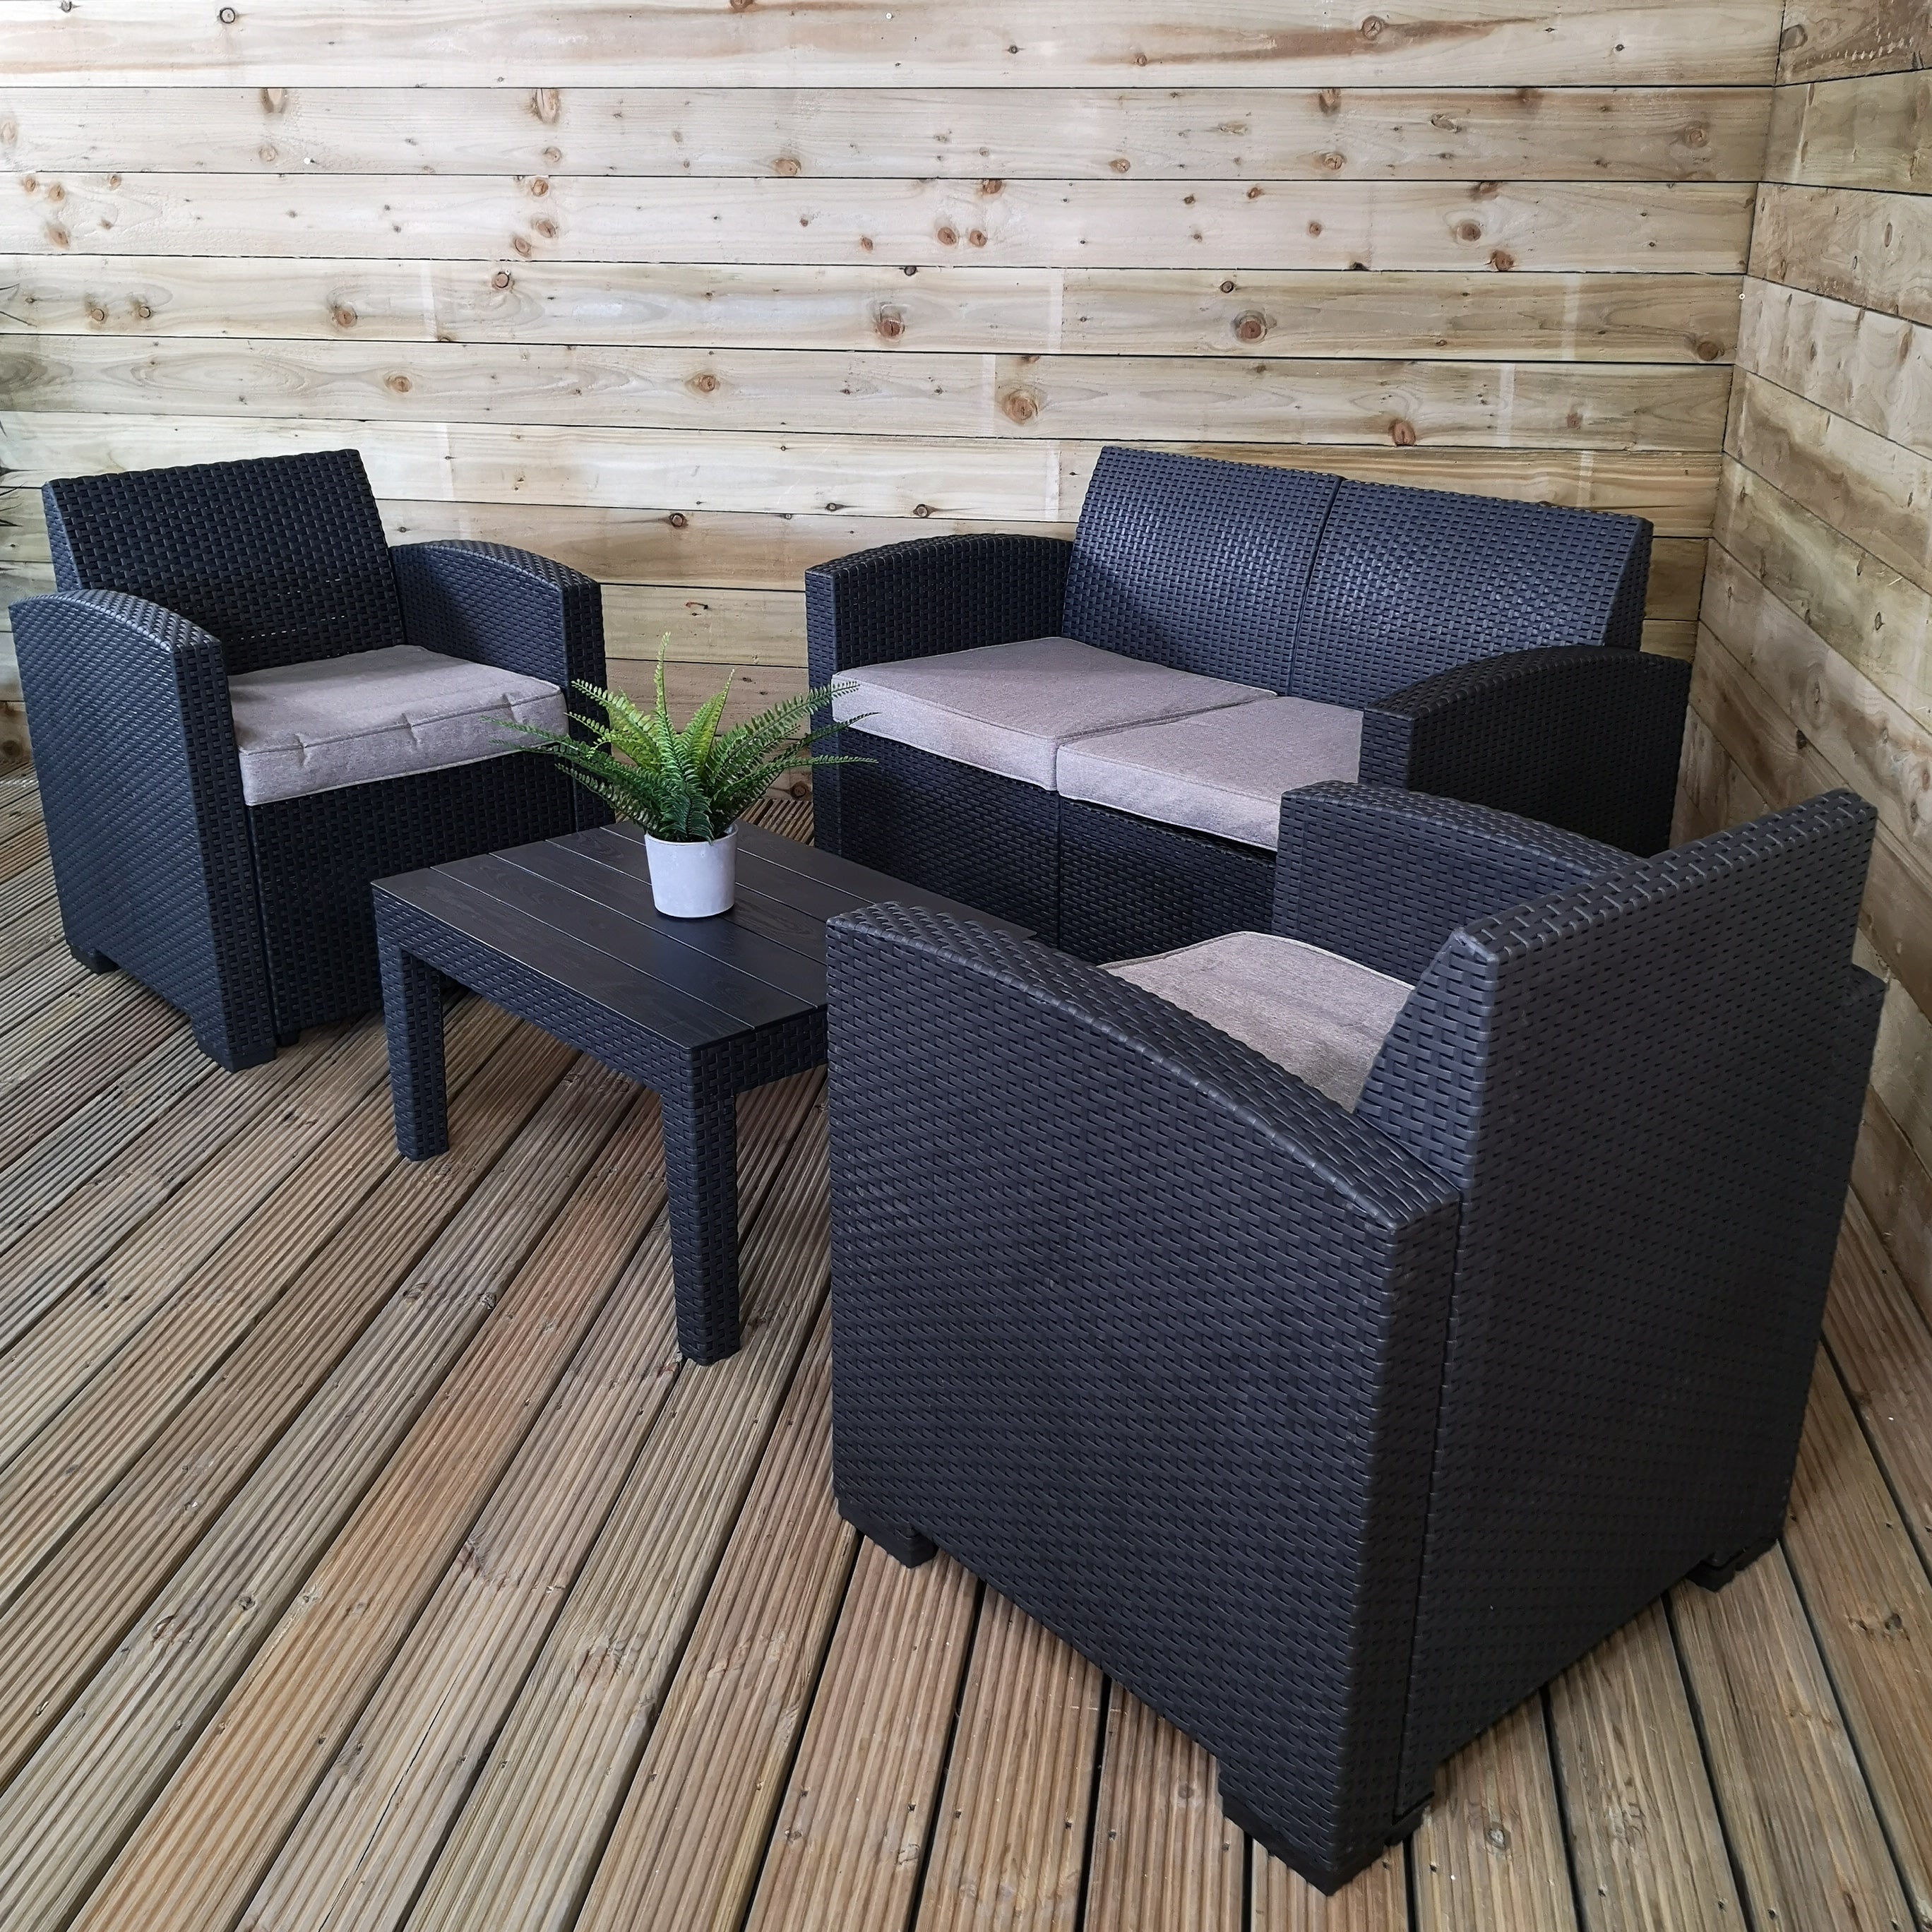 Samuel Alexander Luxury Sturdy Black Rattan Garden Sofa Set With Chairs 4 Piece Rattan Furniture Set Lounger, Includes Sofa, 2 Chairs And Coffee Table